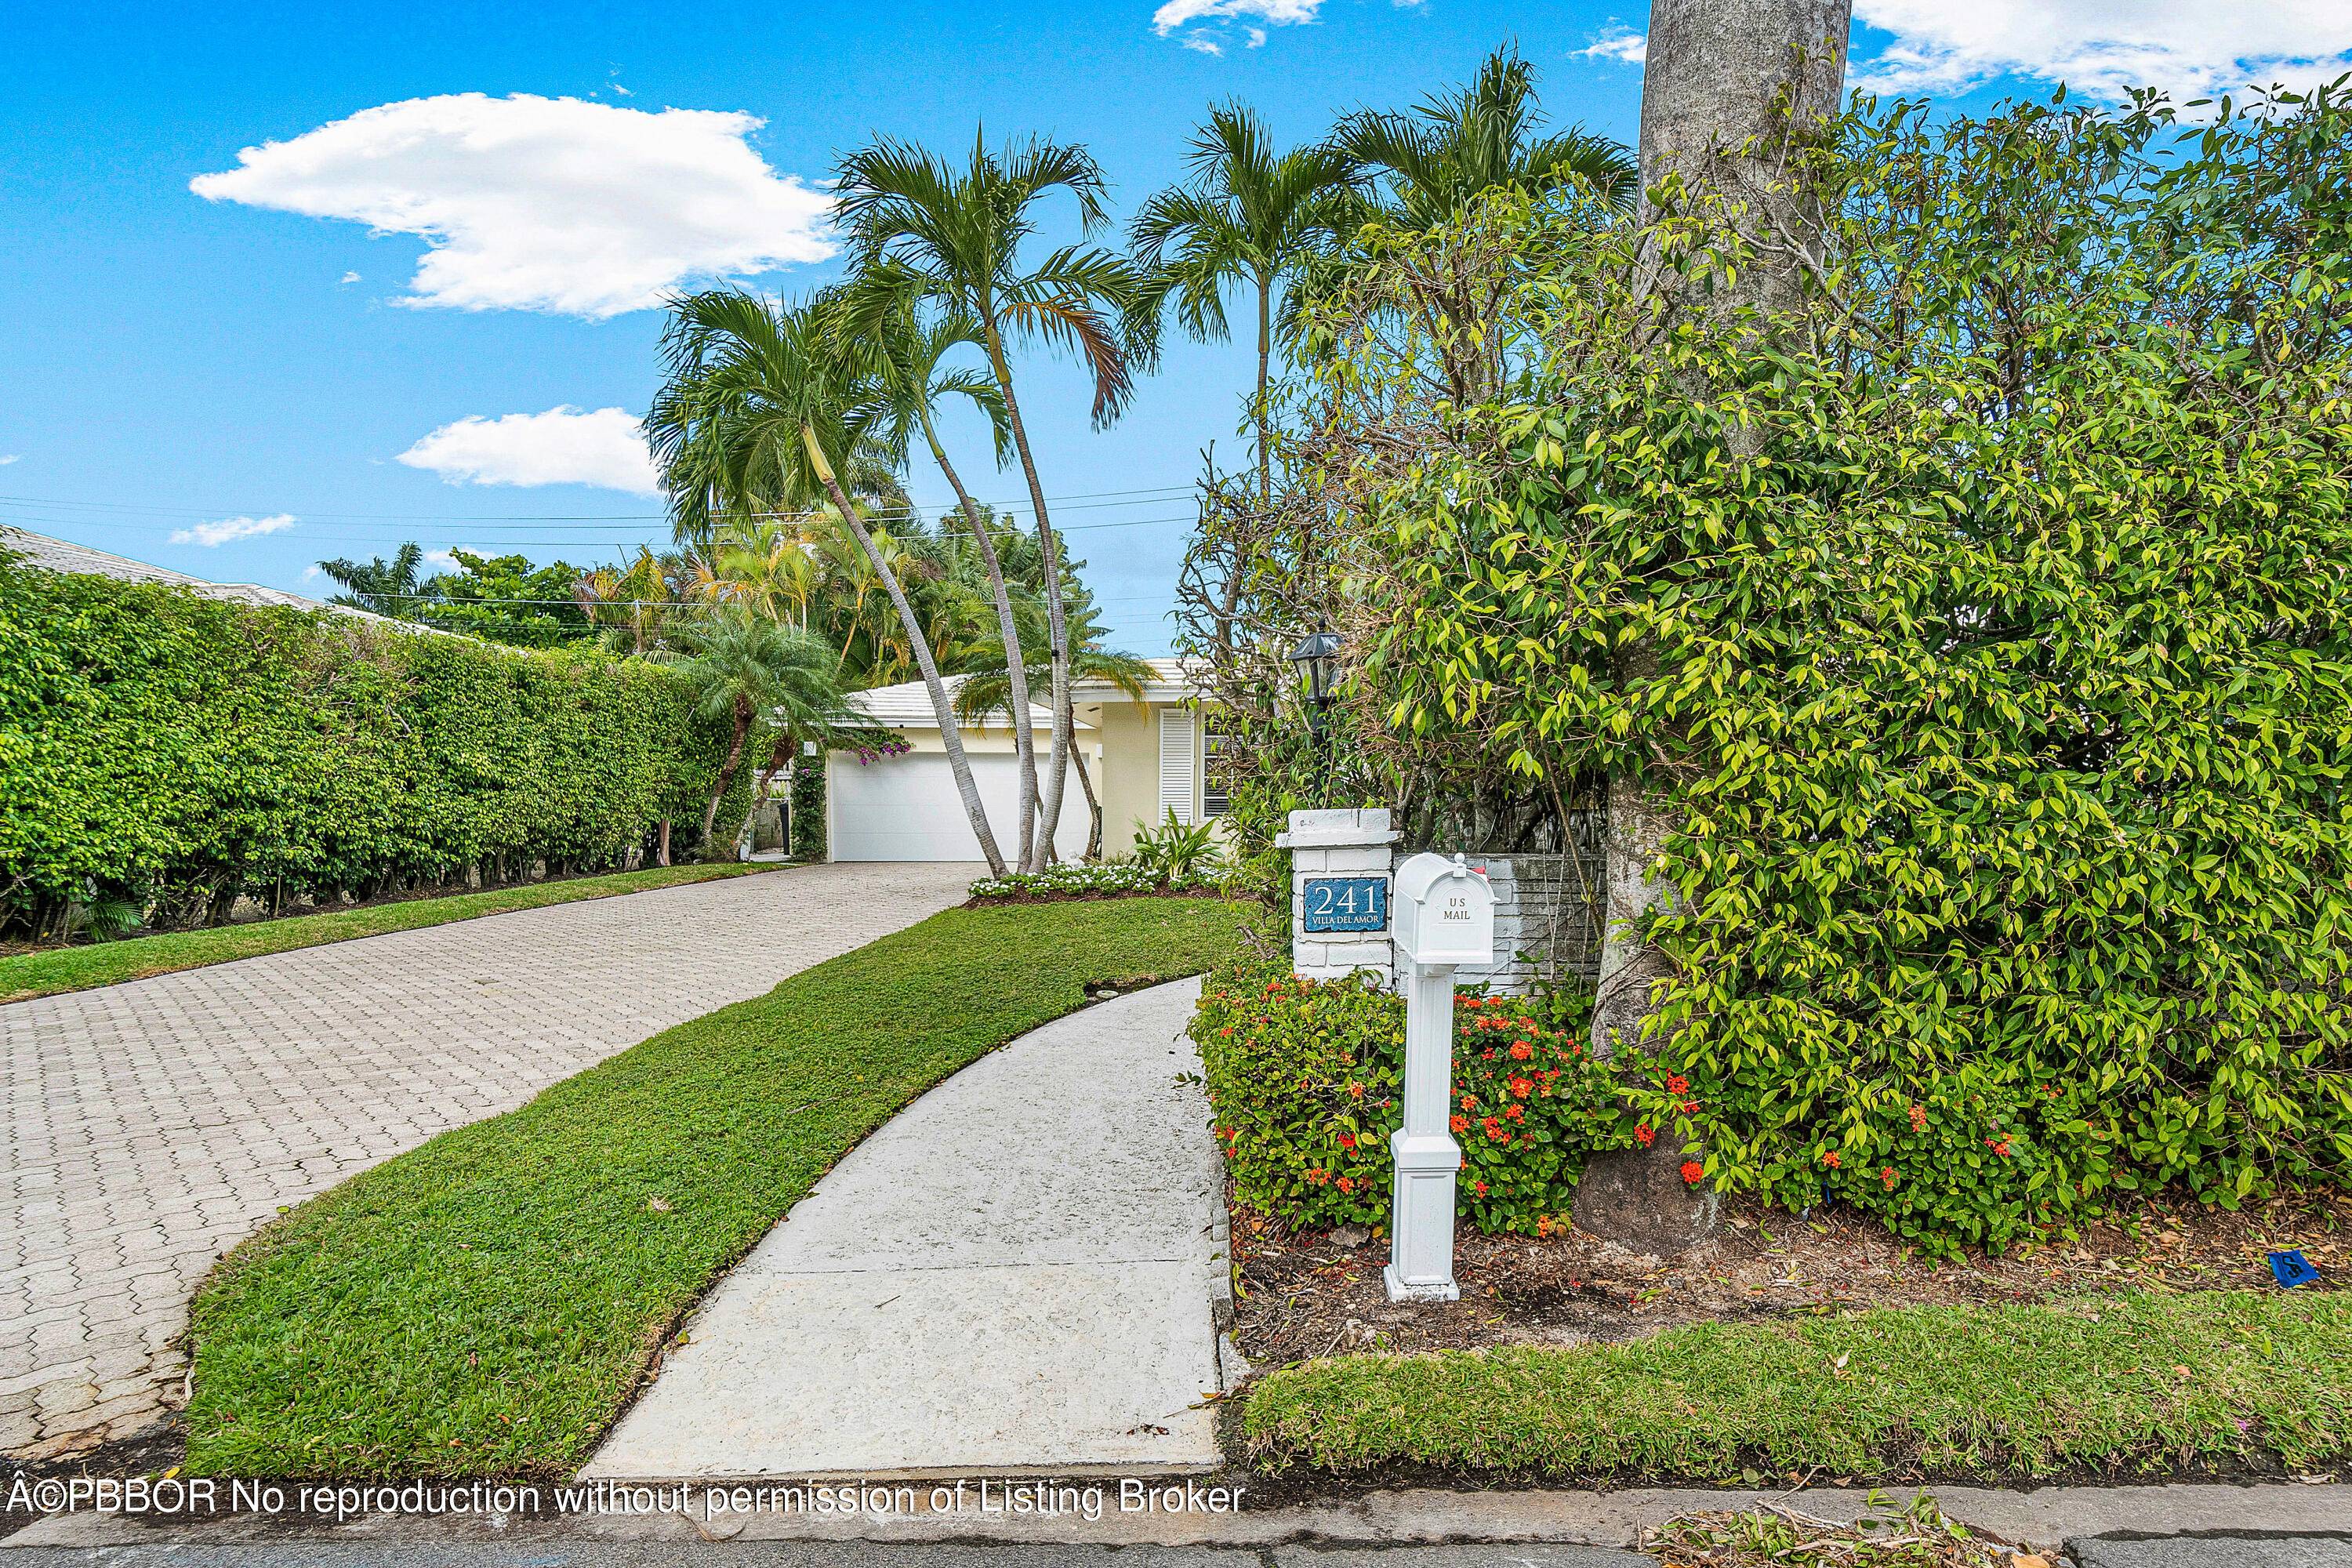 Exquisite Palm Beach Bermuda style single story home, Villa Del Amor on one of the most picturesque streets in the coveted North End available for annual, summer and seasonal rental.